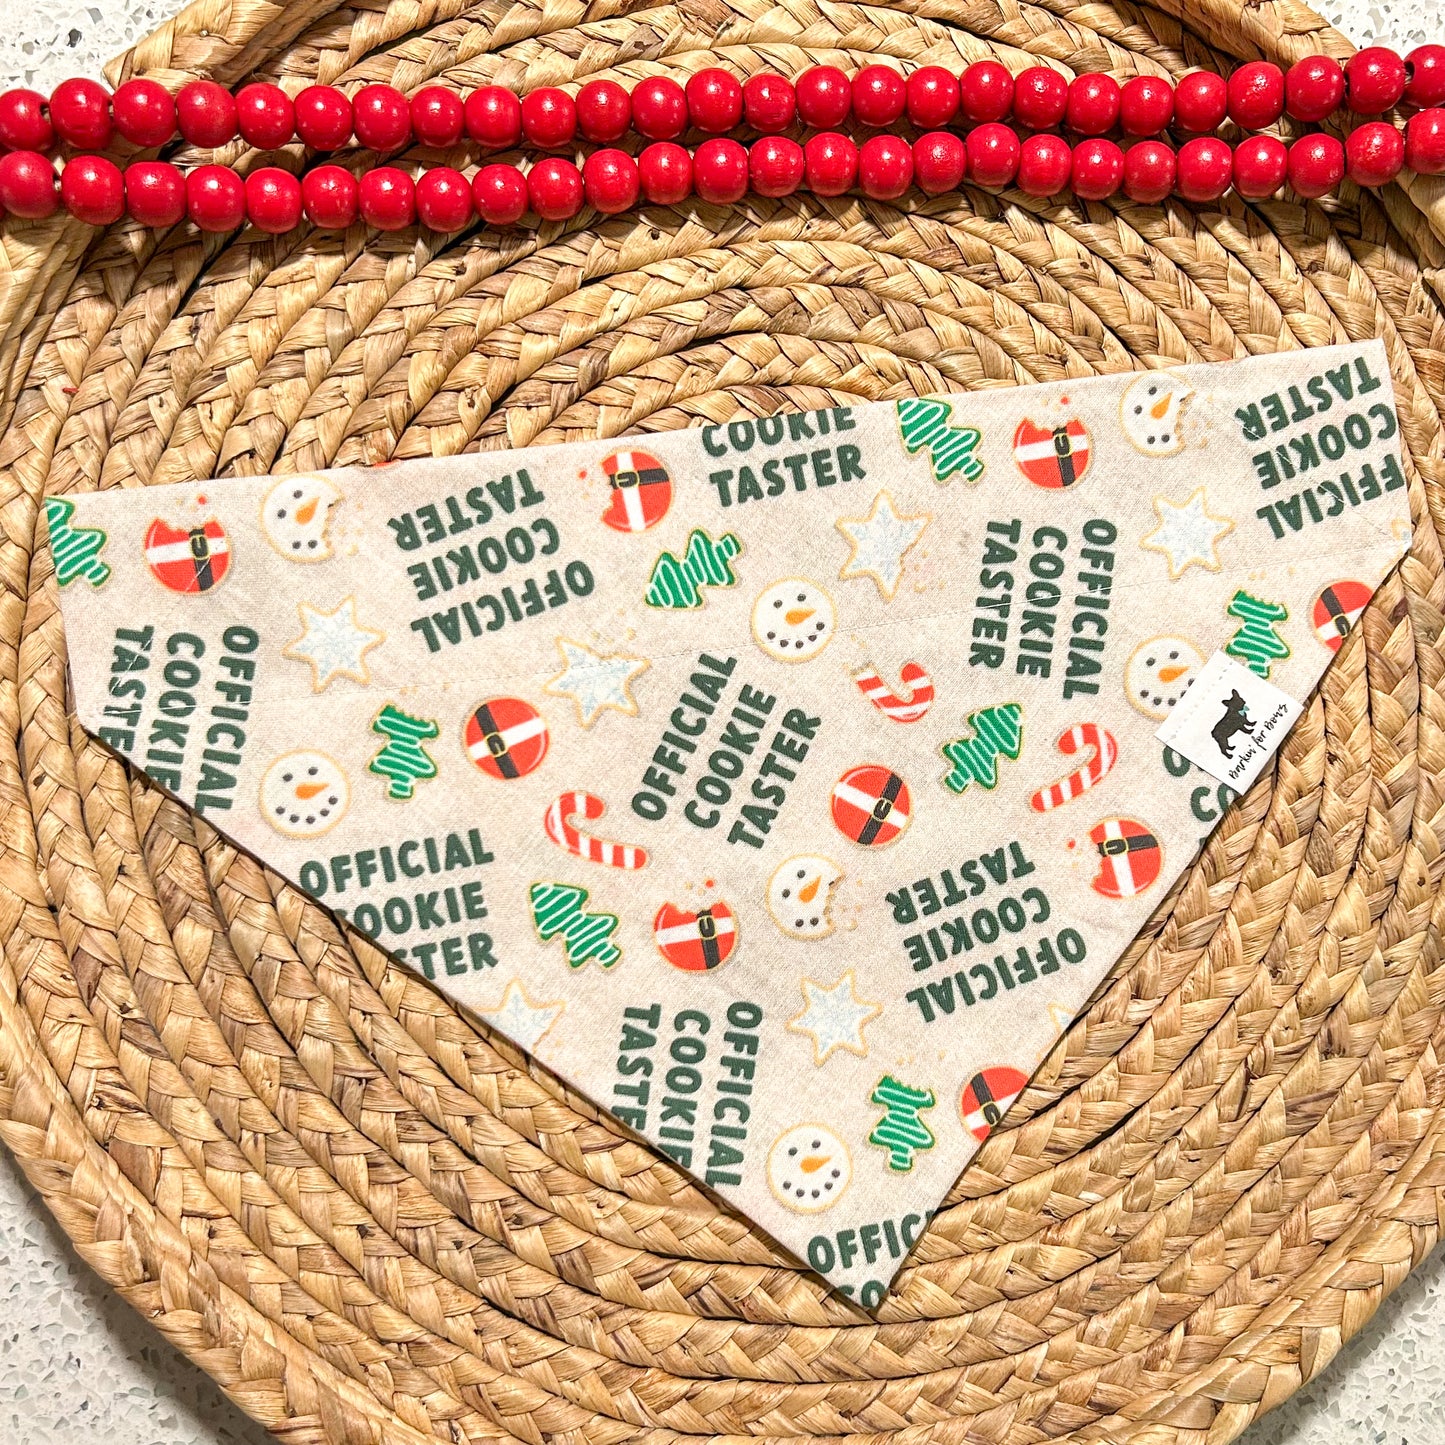 Official Cookie Taster Bandana